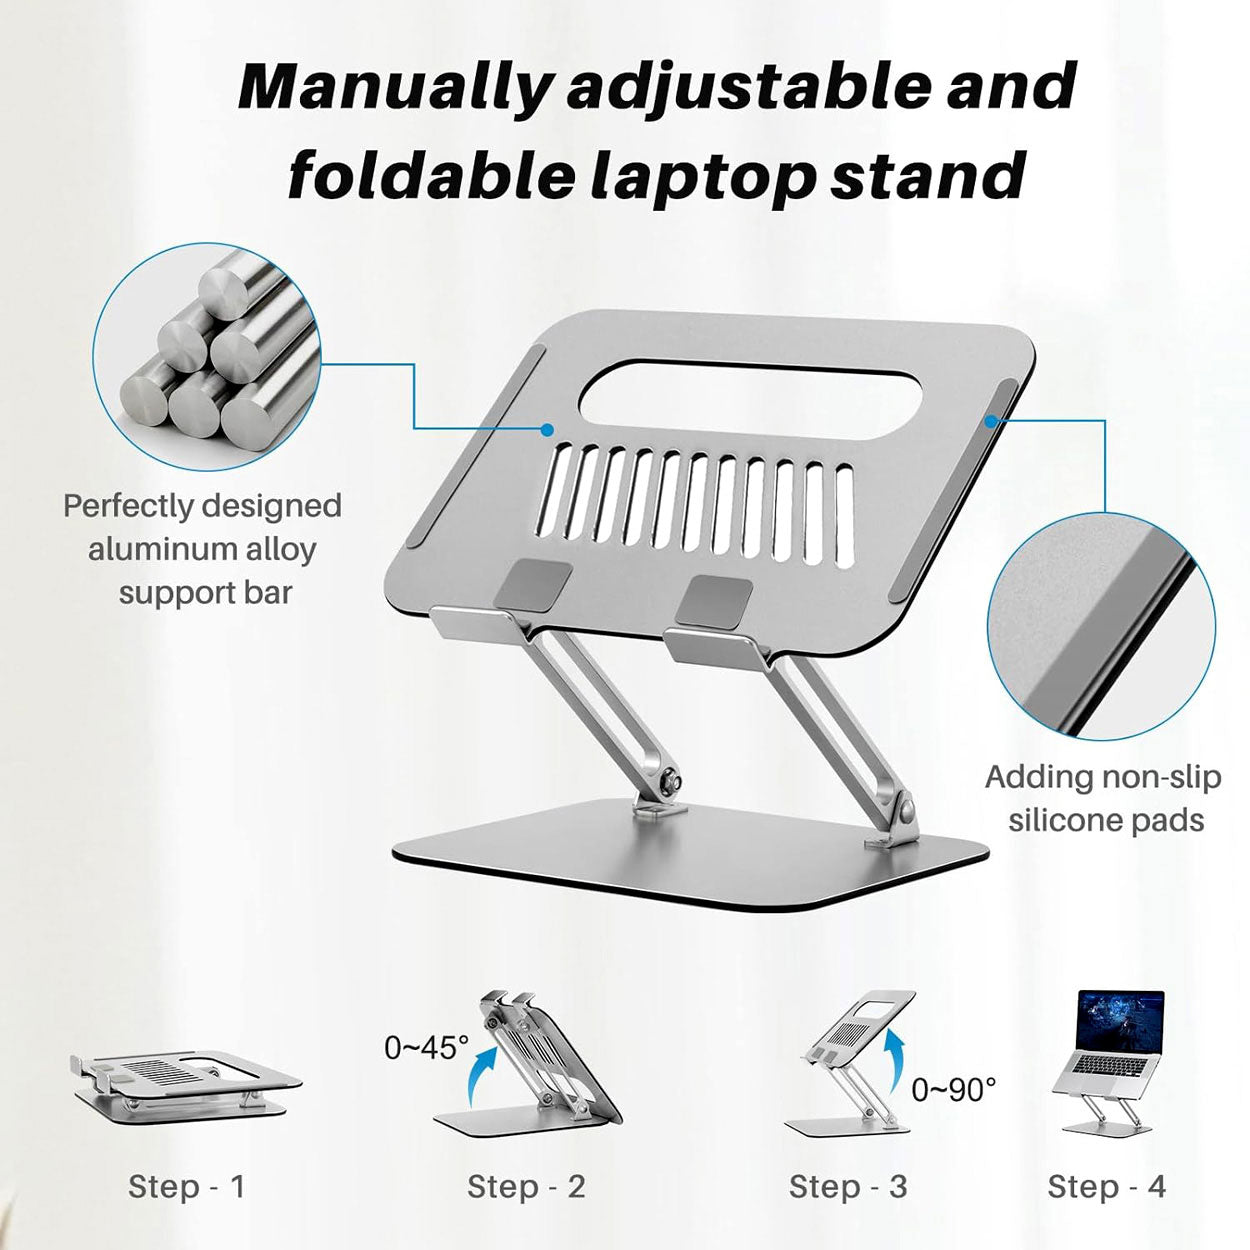 Ergonomic Laptop Stand with Adjustable Height - 5